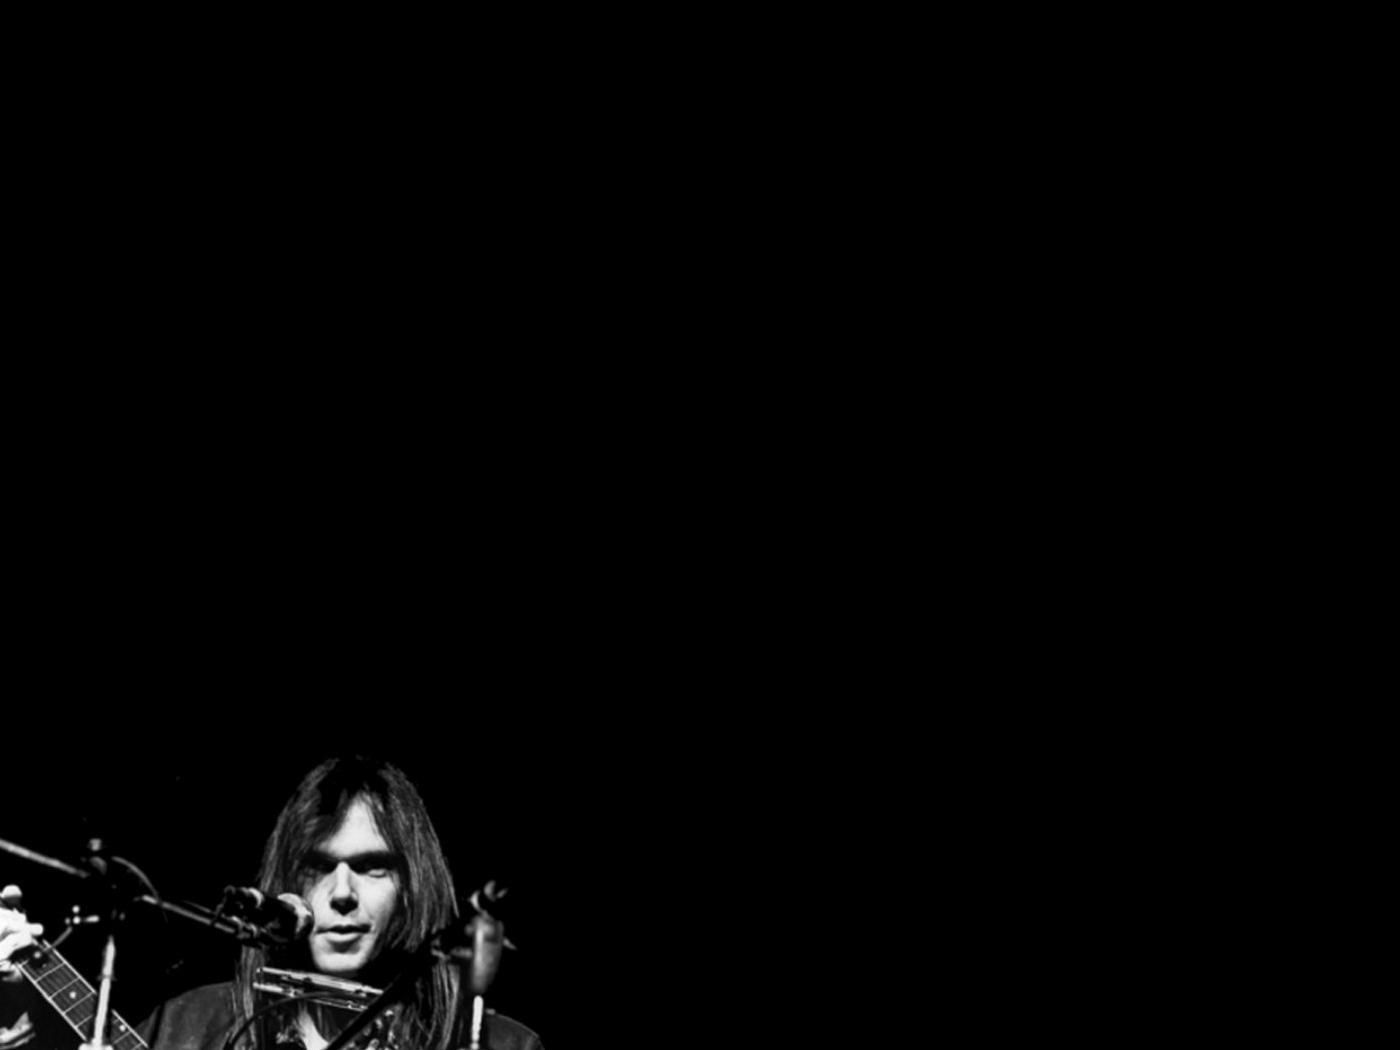 Grayscale Neil Young Black Background #9Cbg